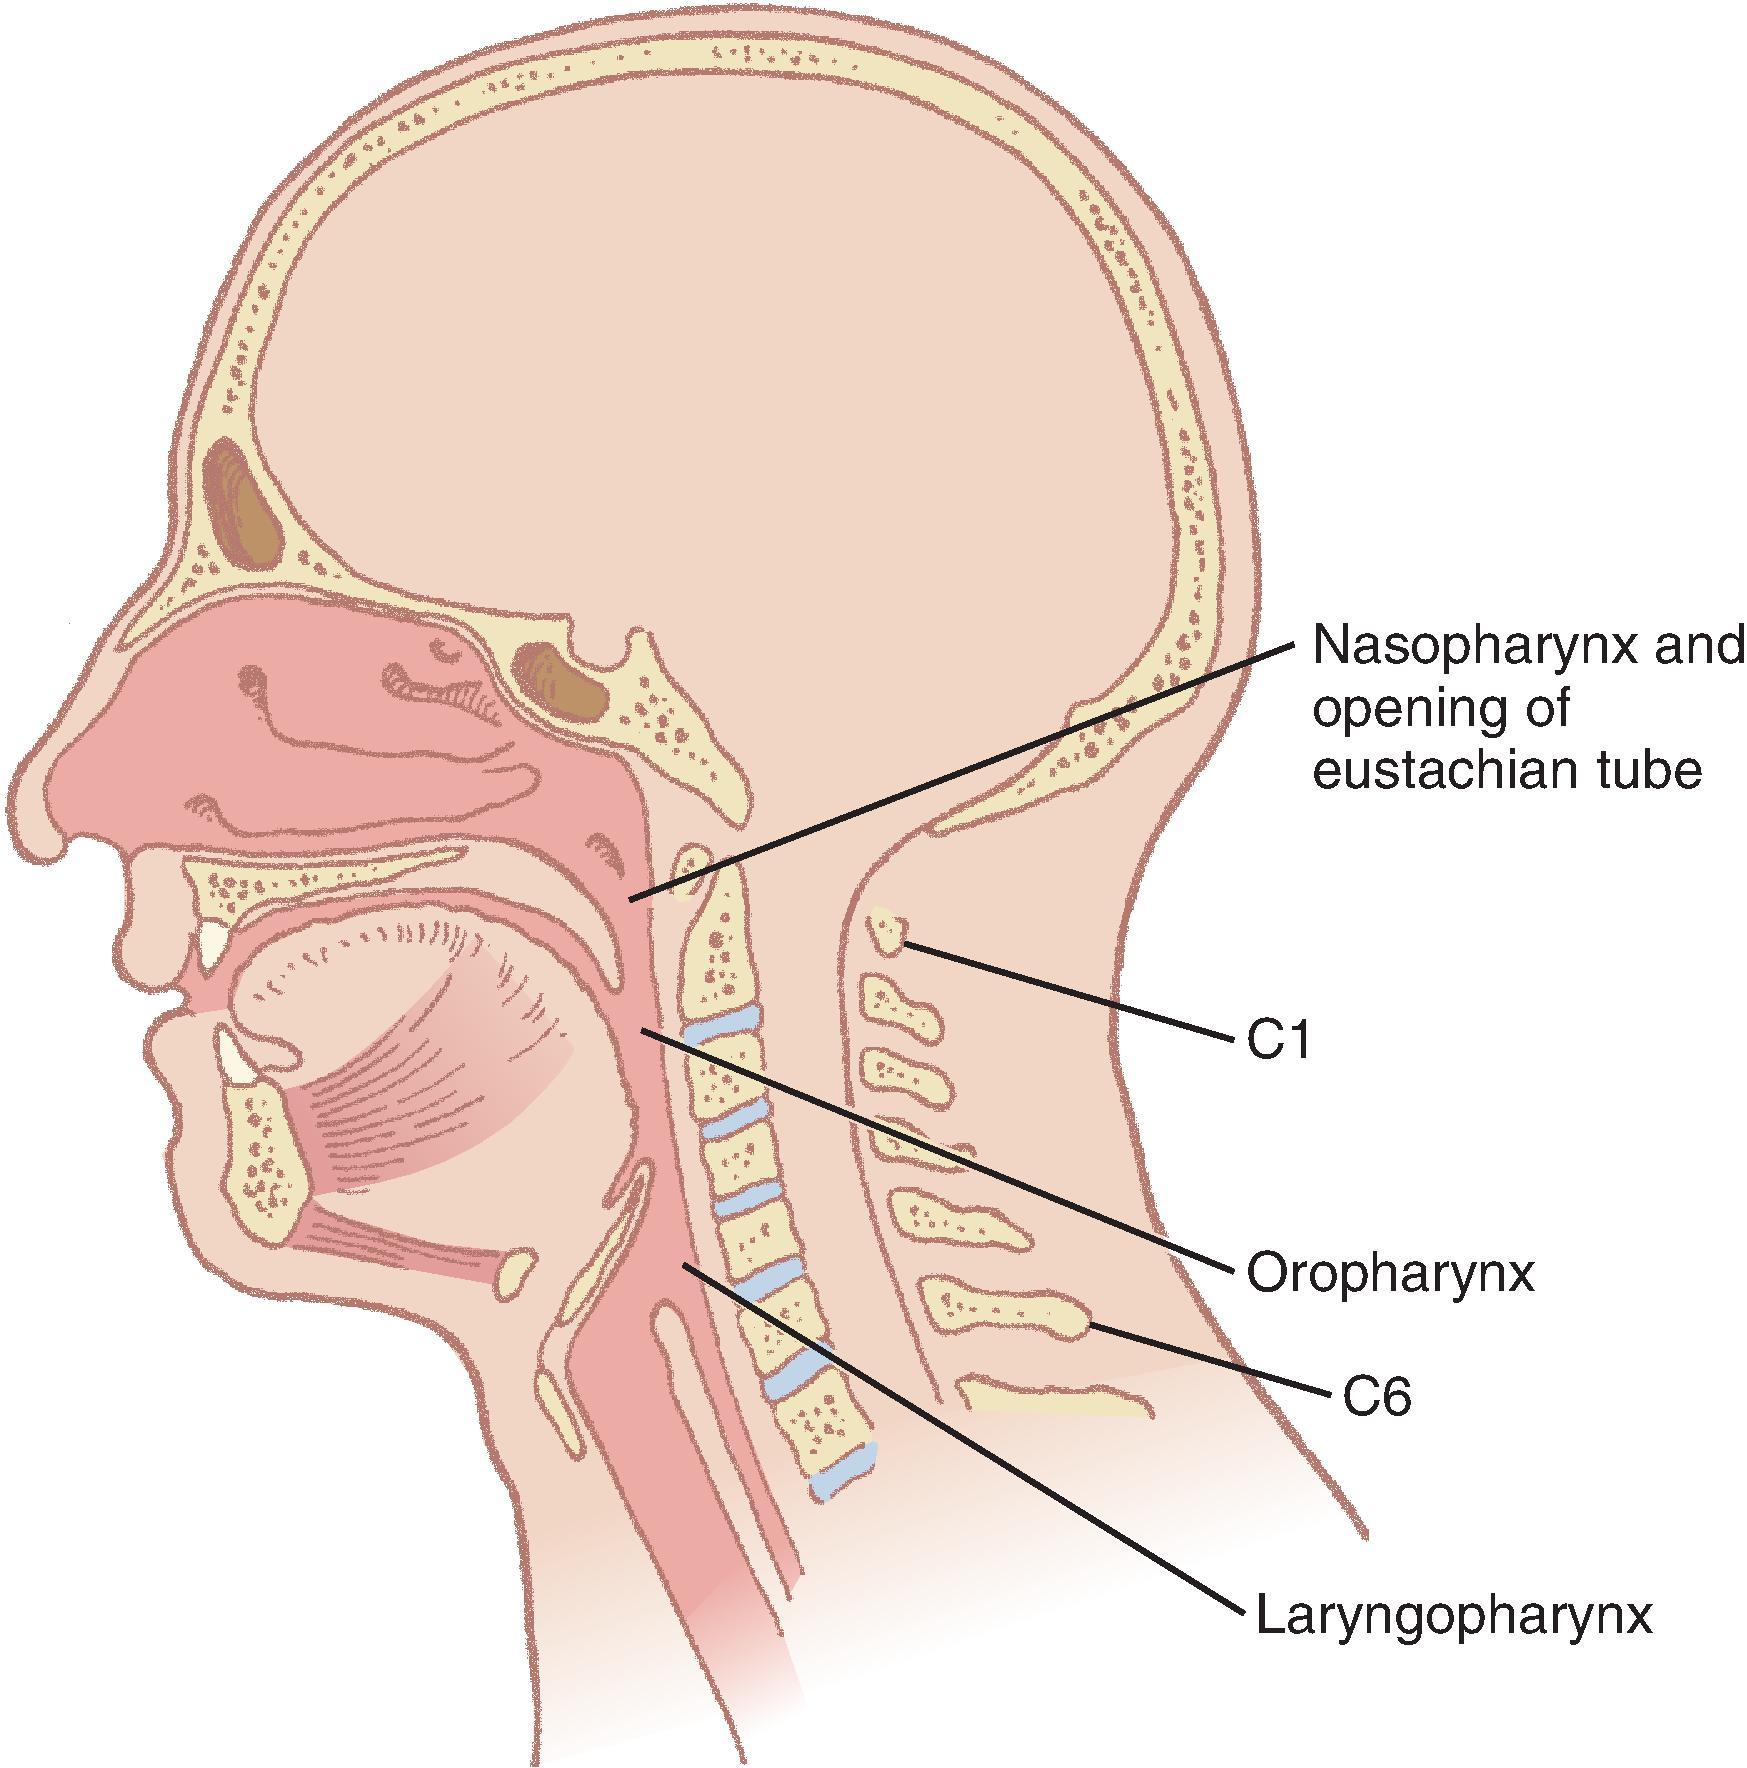 Fig. 1.3, Sagittal section through the head and neck showing the divisions of the pharynx. The laryngopharynx is also known as the hypopharynx .